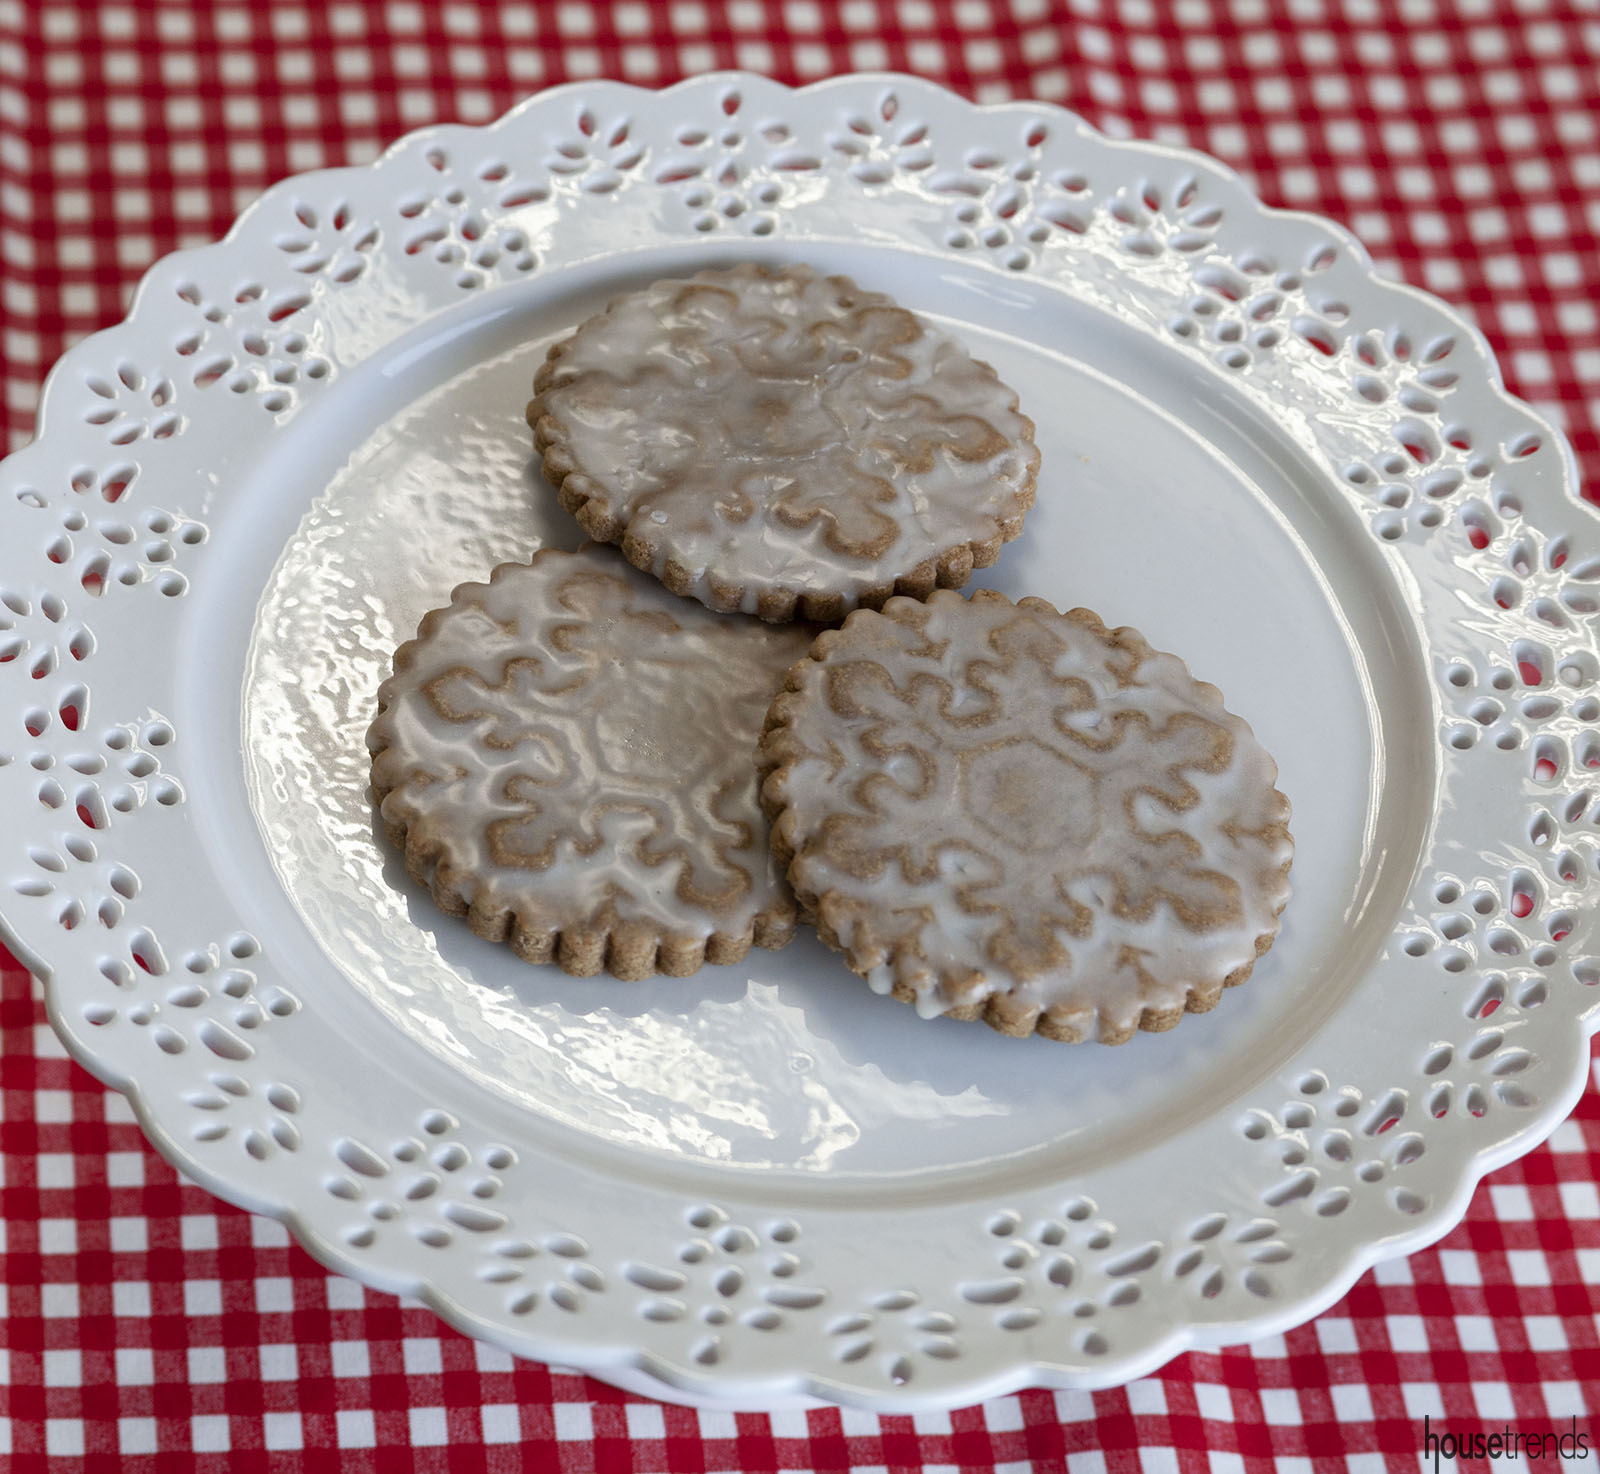 https://www.housetrends.com/wp-content/uploads/2019/11/02_Stamped-brown-butter-muscovado-cookies_1119_ck.jpg